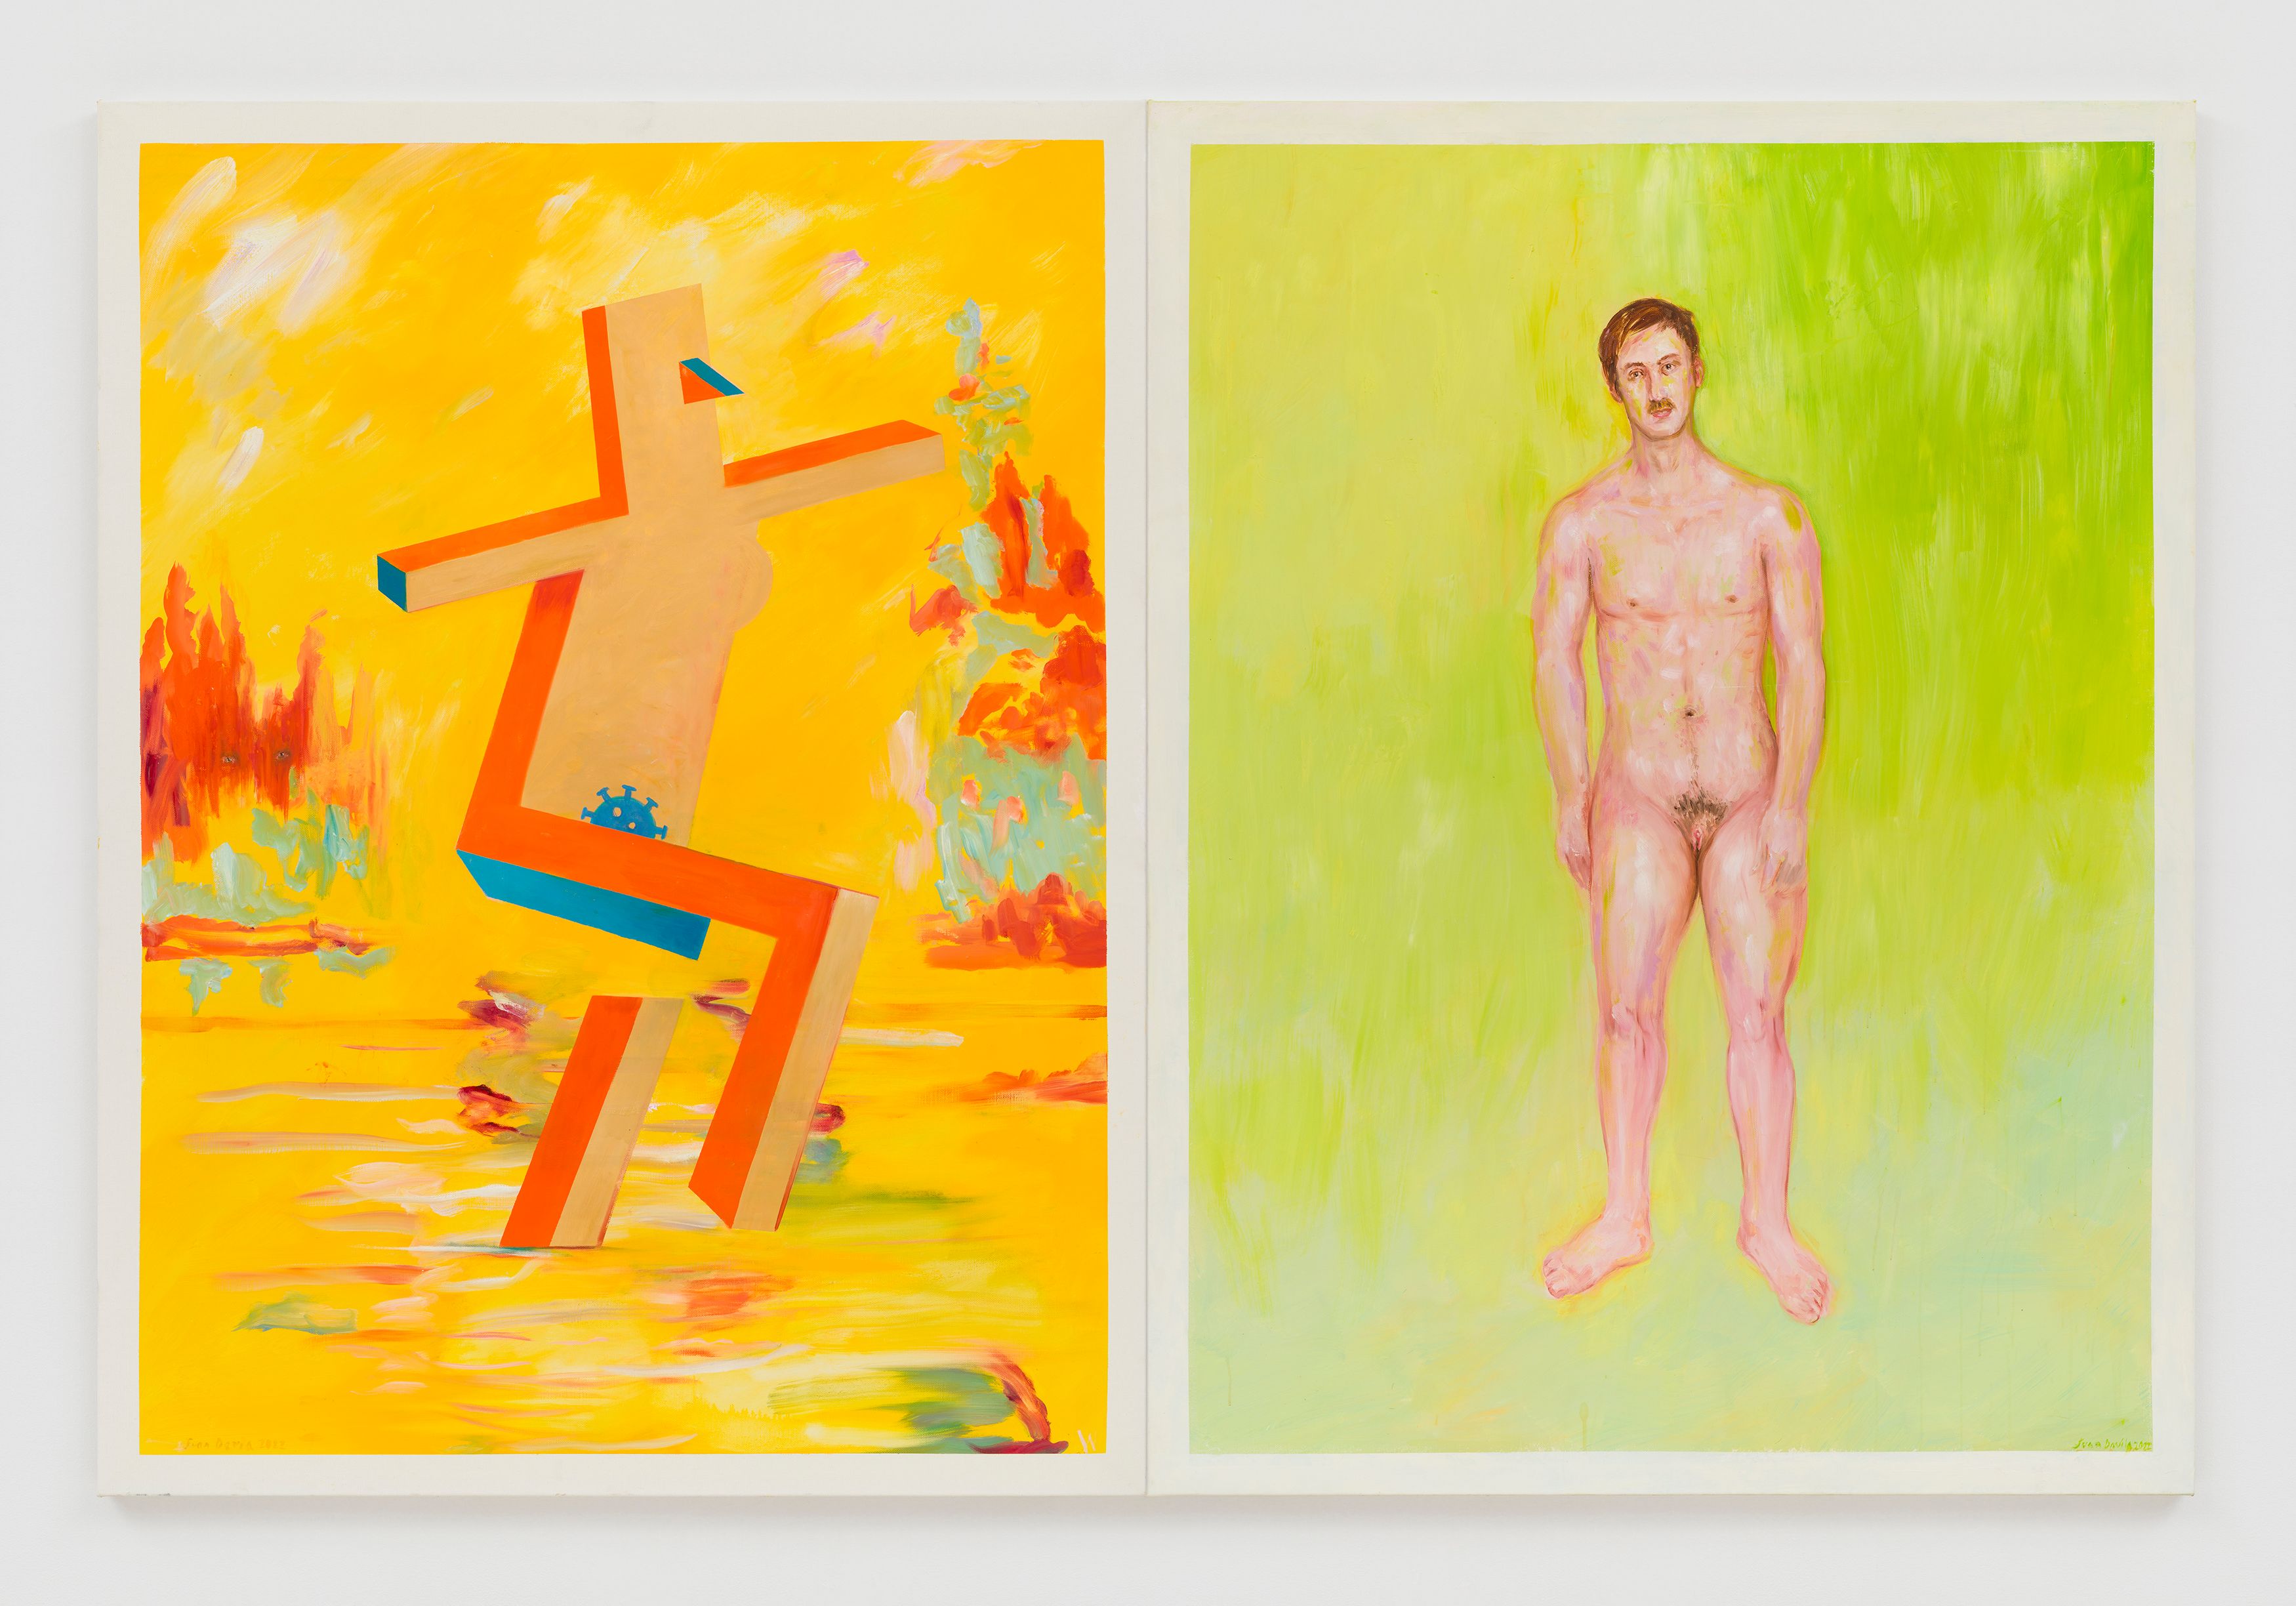 Juan Davila, Untitled, 2022, diptych, oil on canvas, 63 x 94 1/2 in. (160 x 240 cm) overall